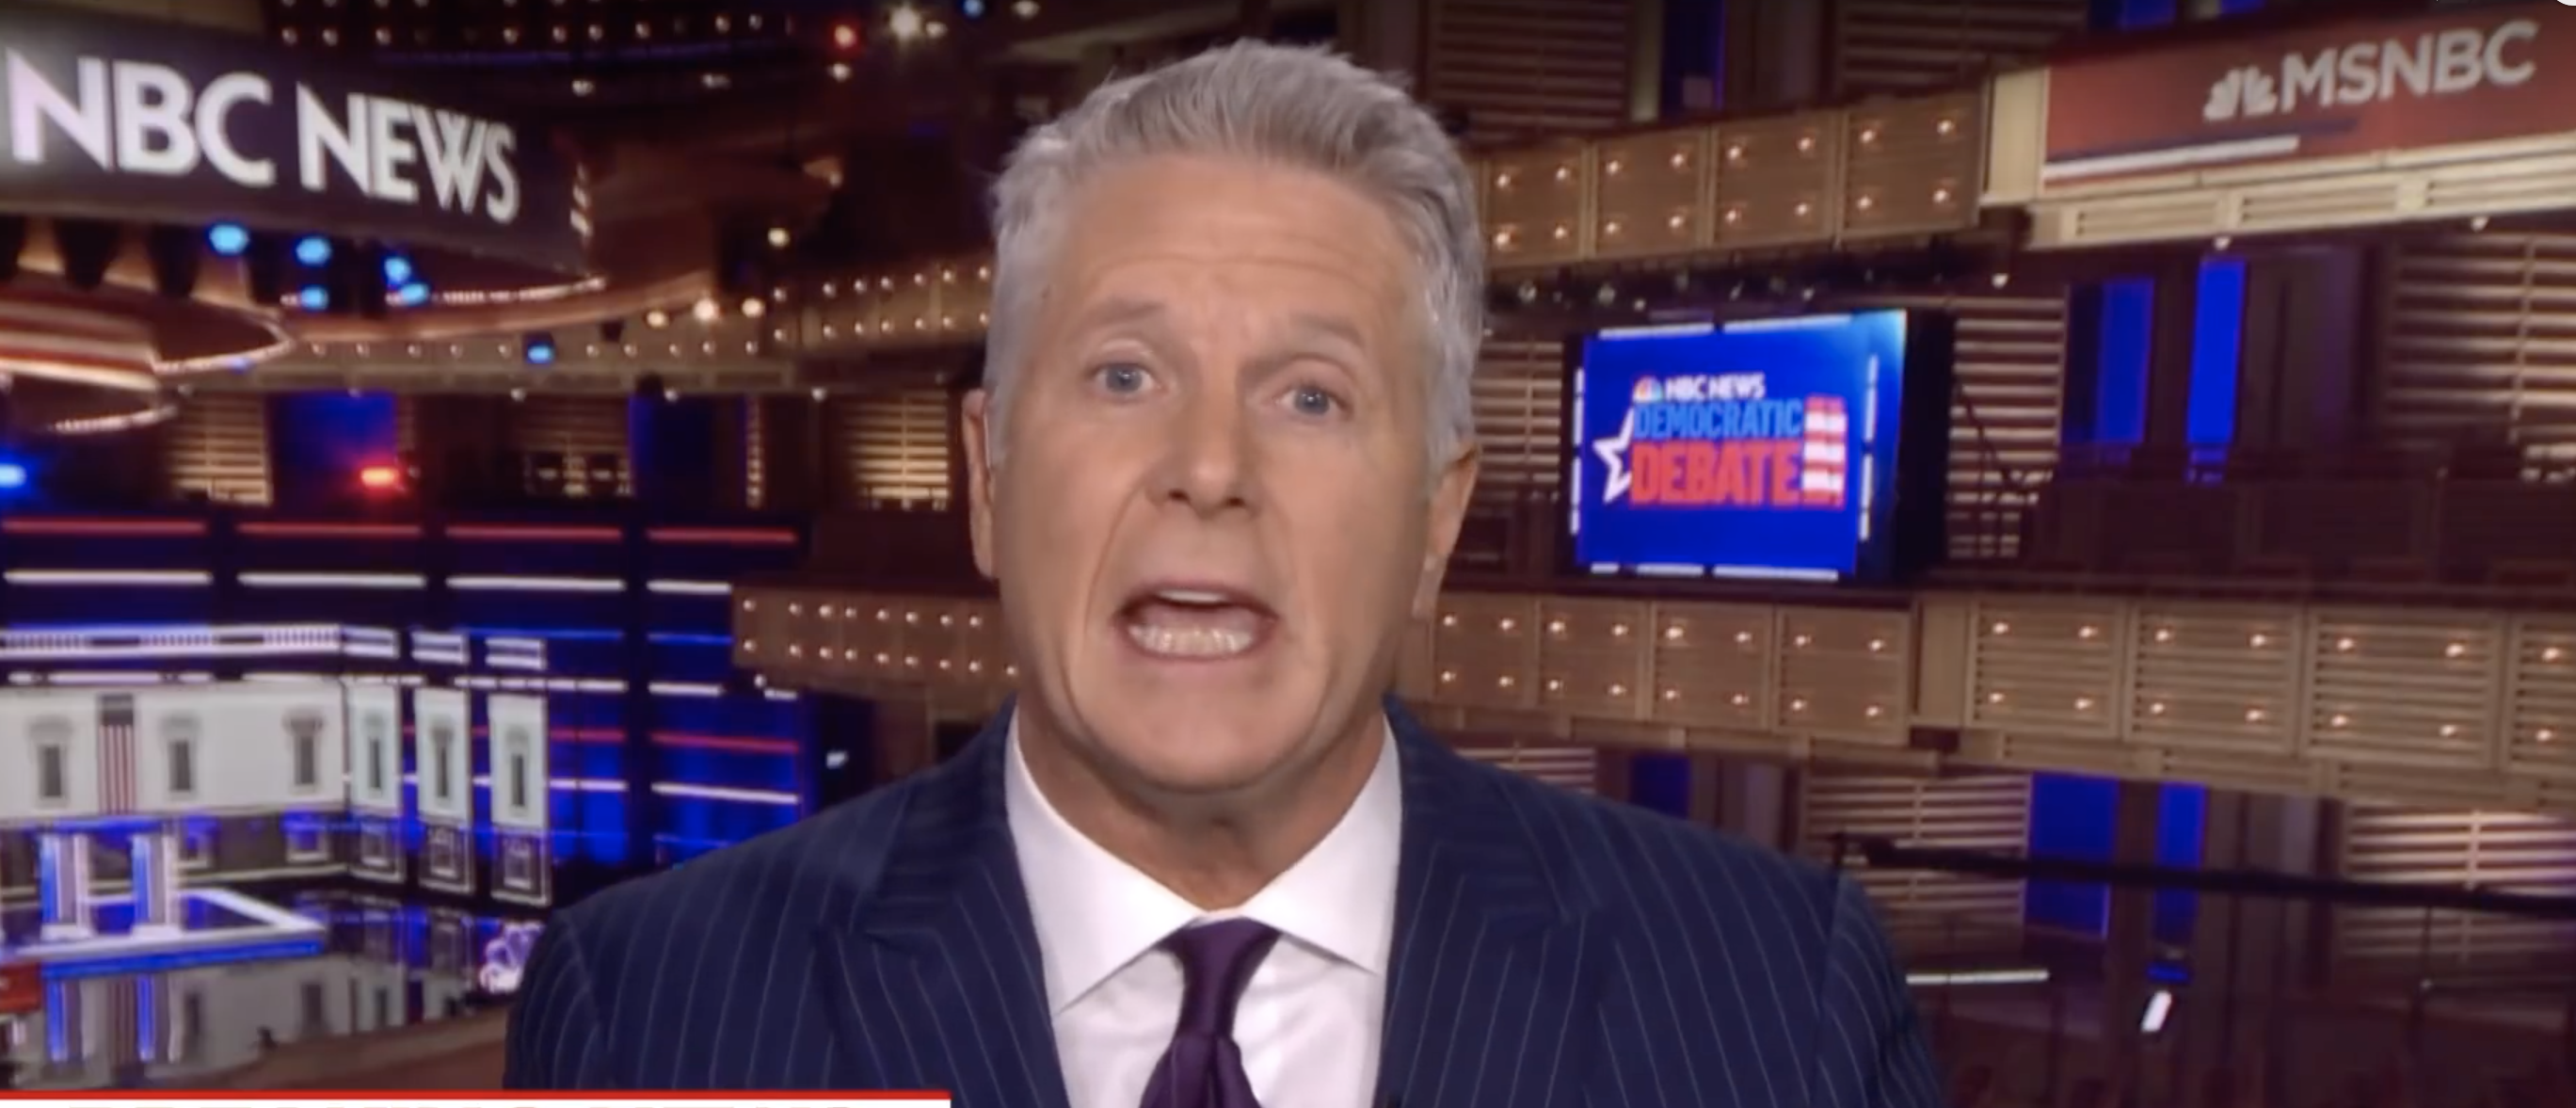 MSNBC’s Donny Deutsch Gets His Fifth Show Cancelled The Daily Caller